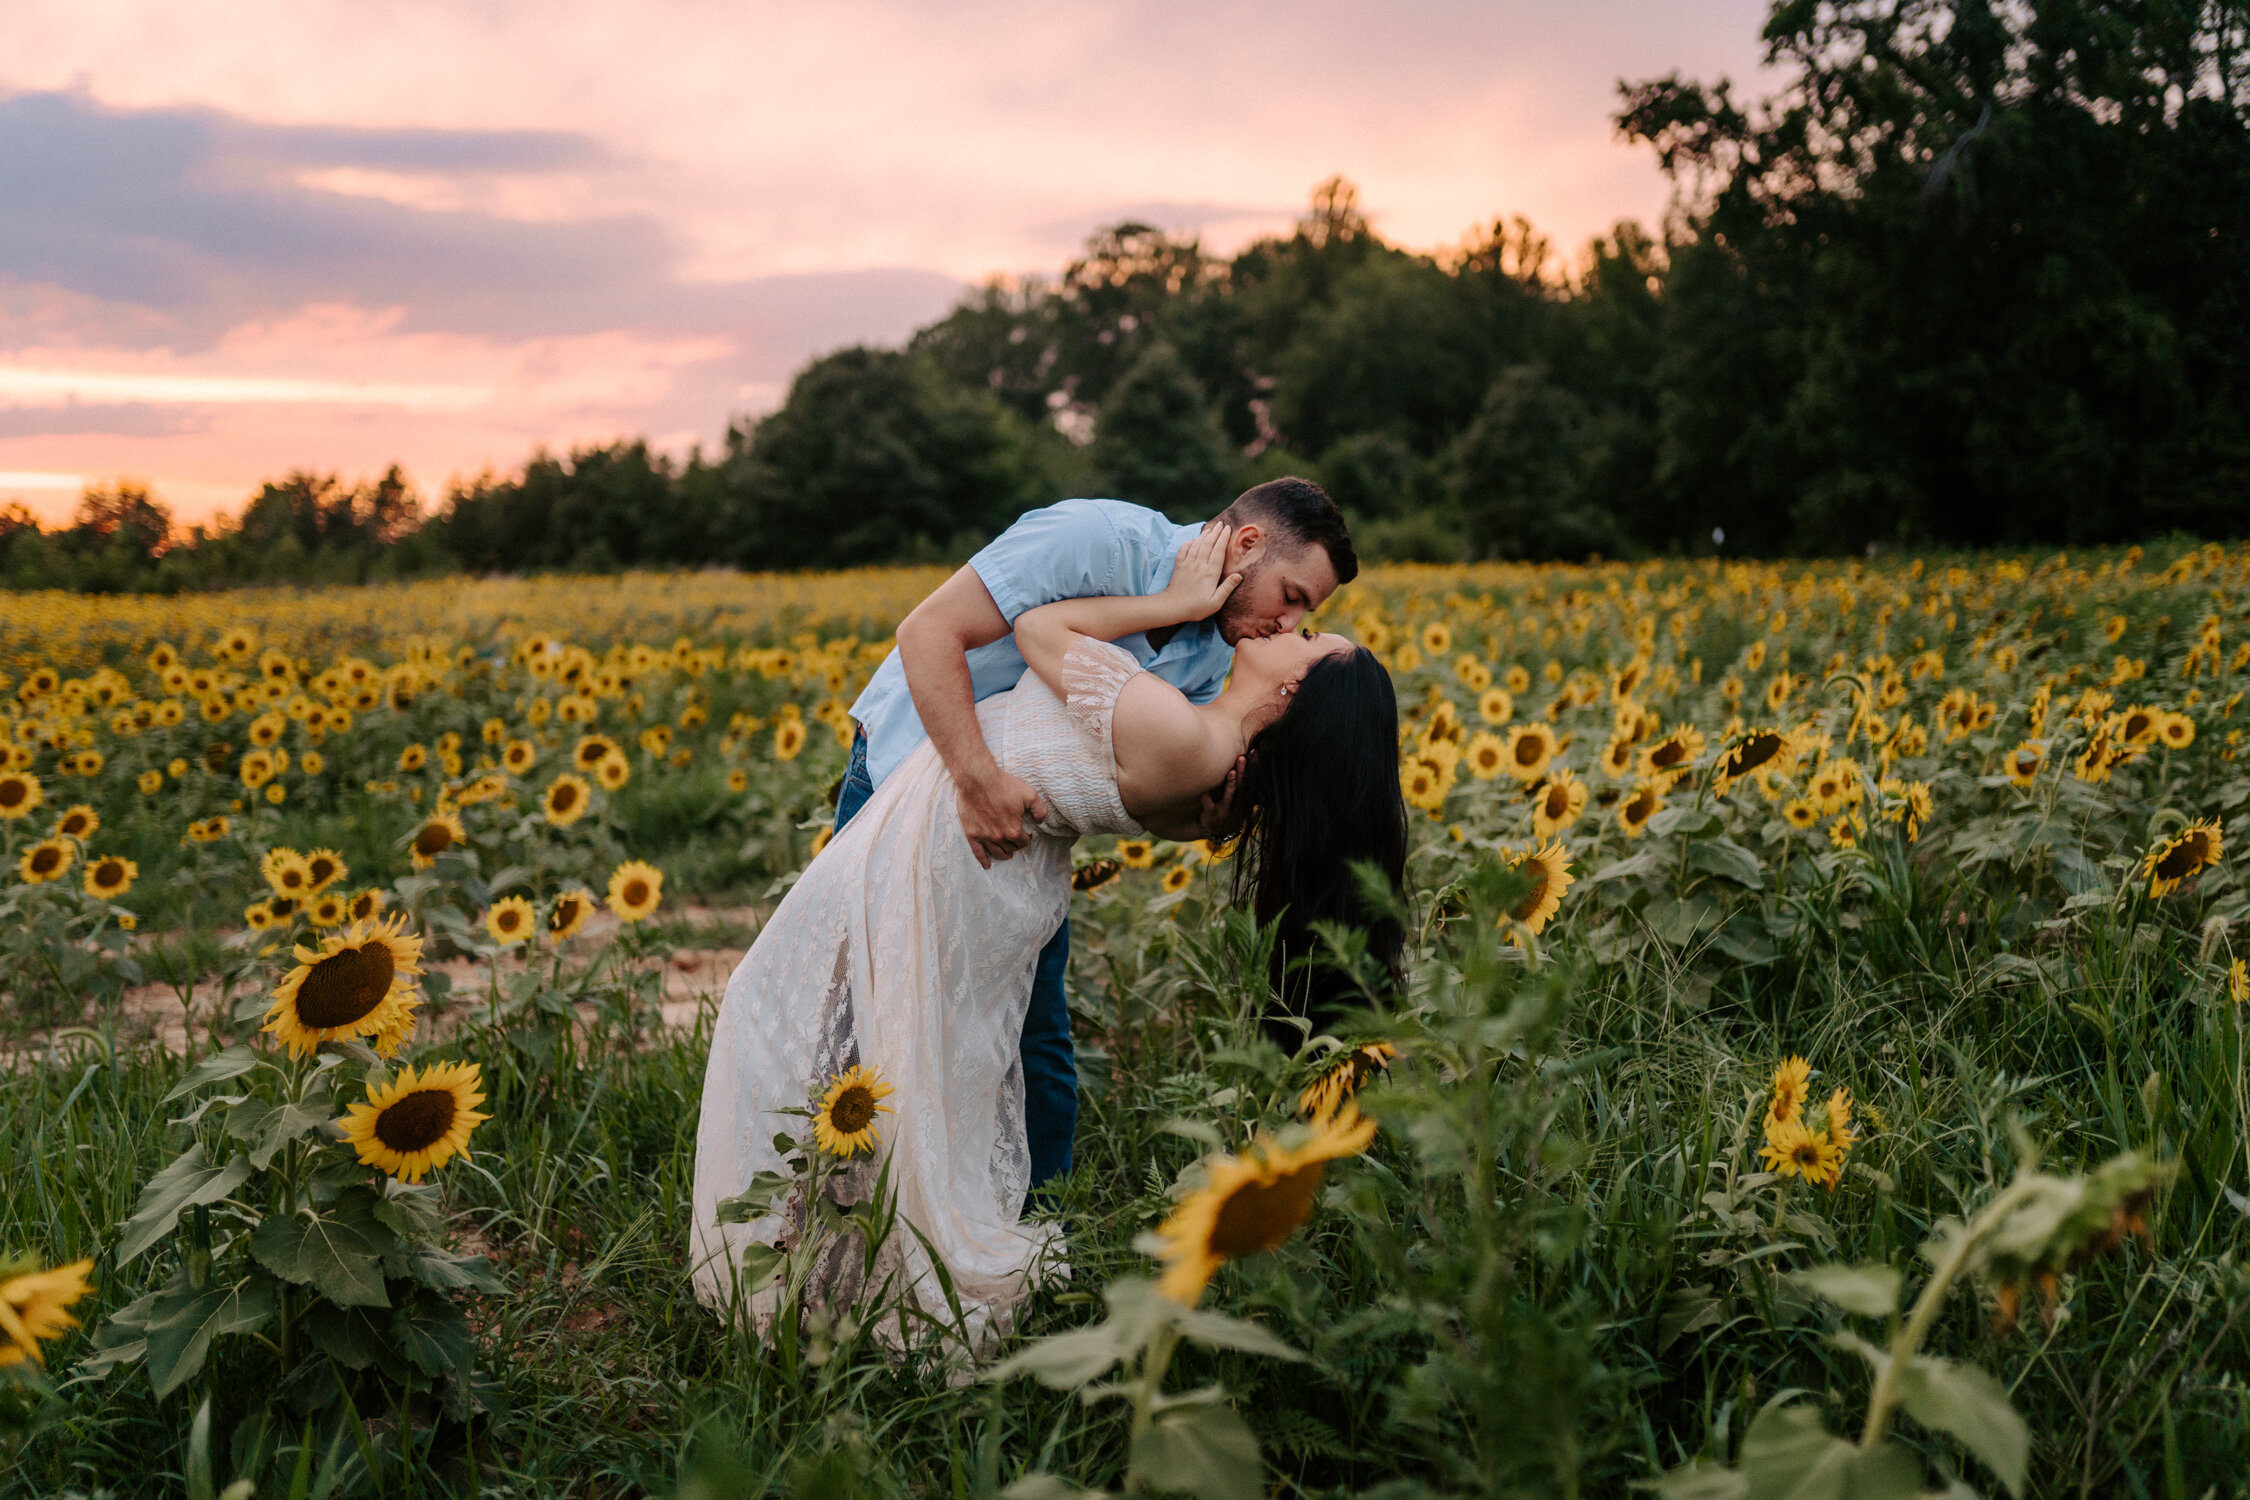 How to pick out your wardrobe & outfits for your Engagement Session! by Kayli LaFon Photography